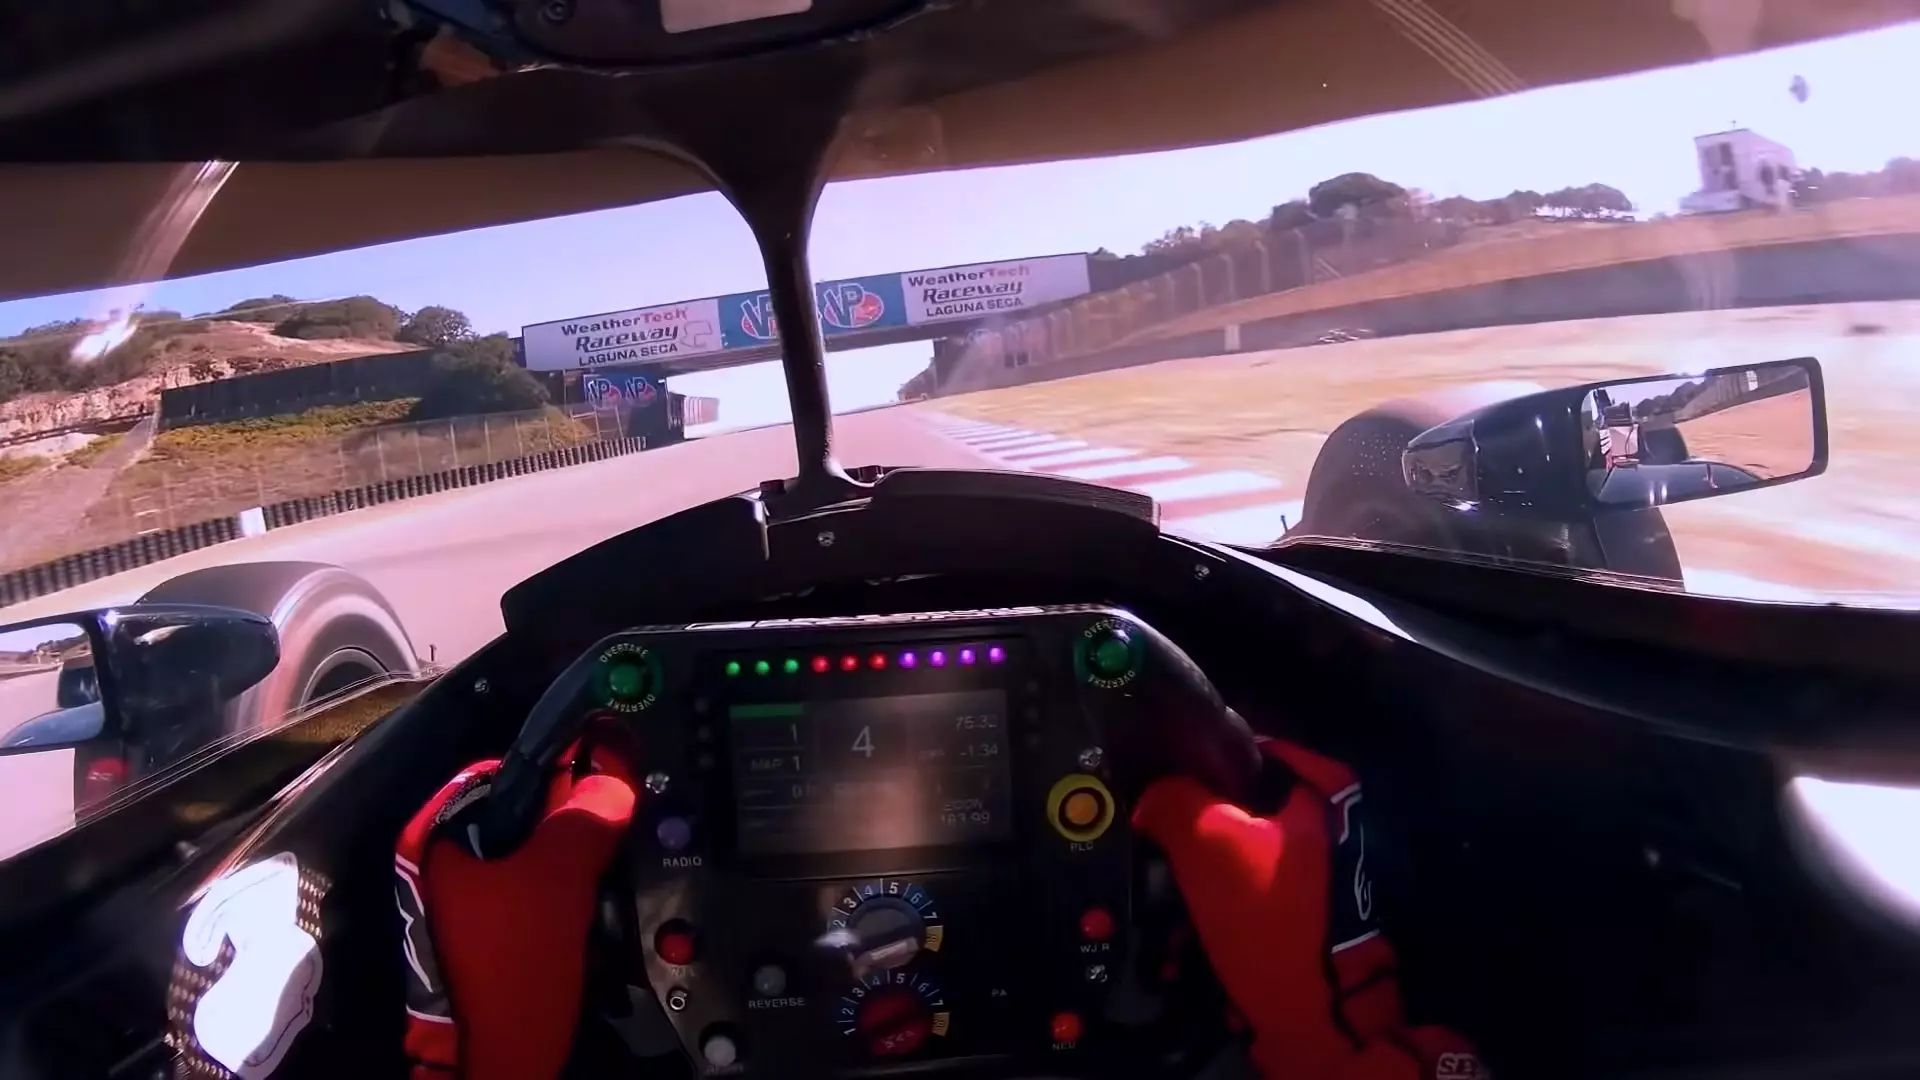 This IndyCar Onboard Footage at Laguna Seca is as Gut-Twisting as a Rollercoaster Ride | Autance